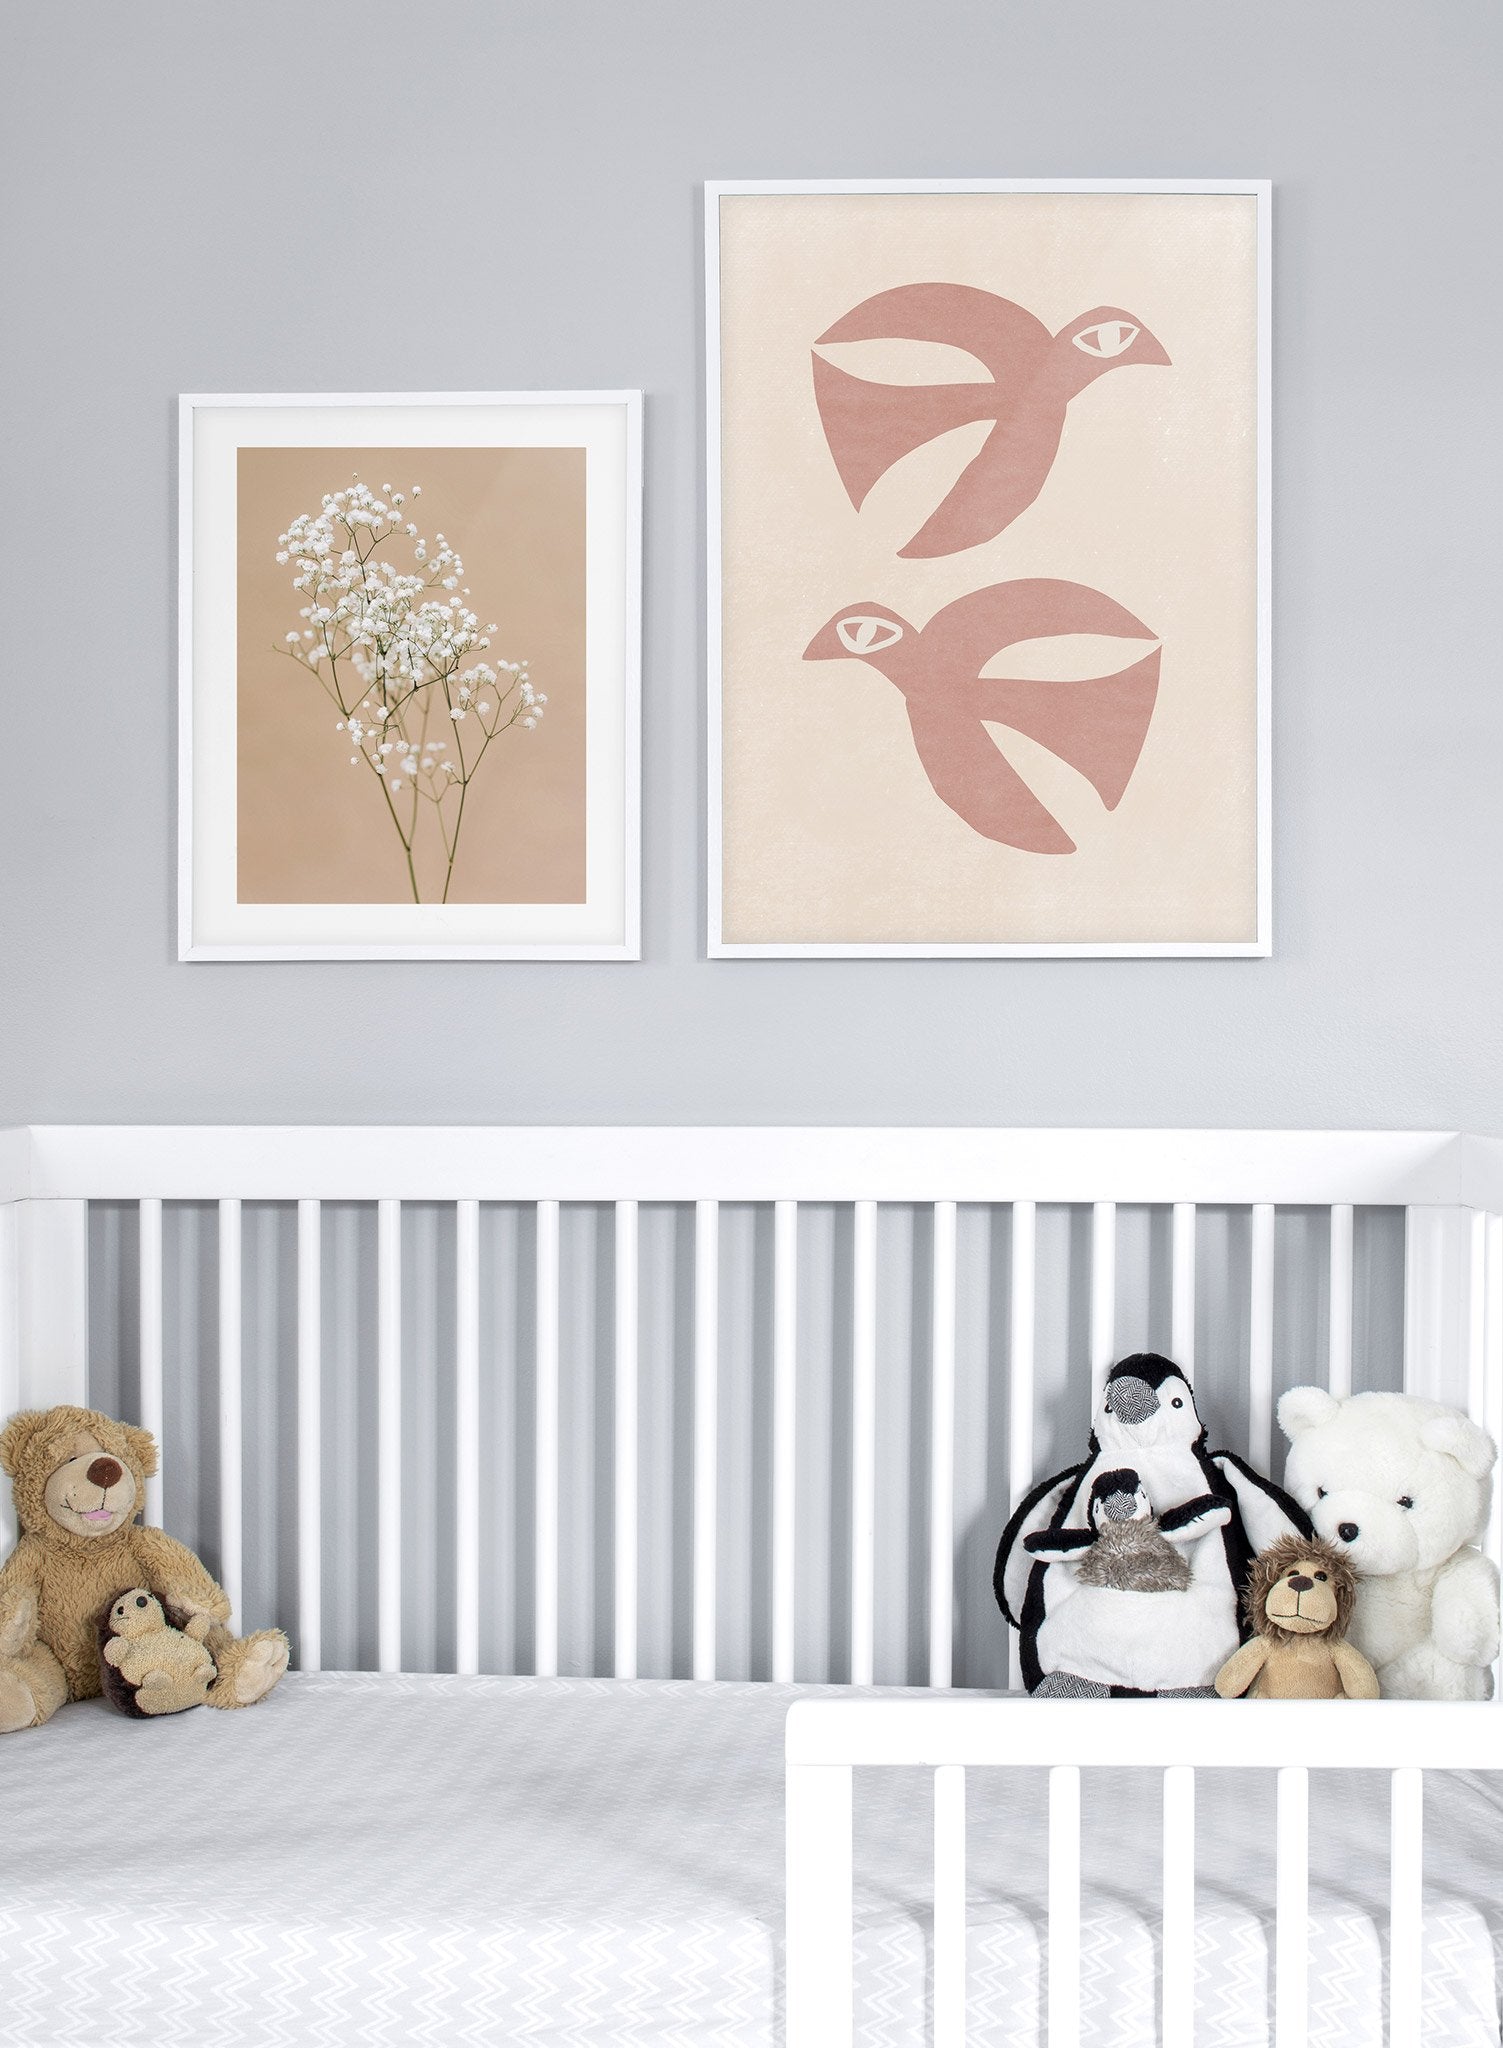 Modern minimalist illustration poster by Opposite Wall with pink birds - Kids Bedroom